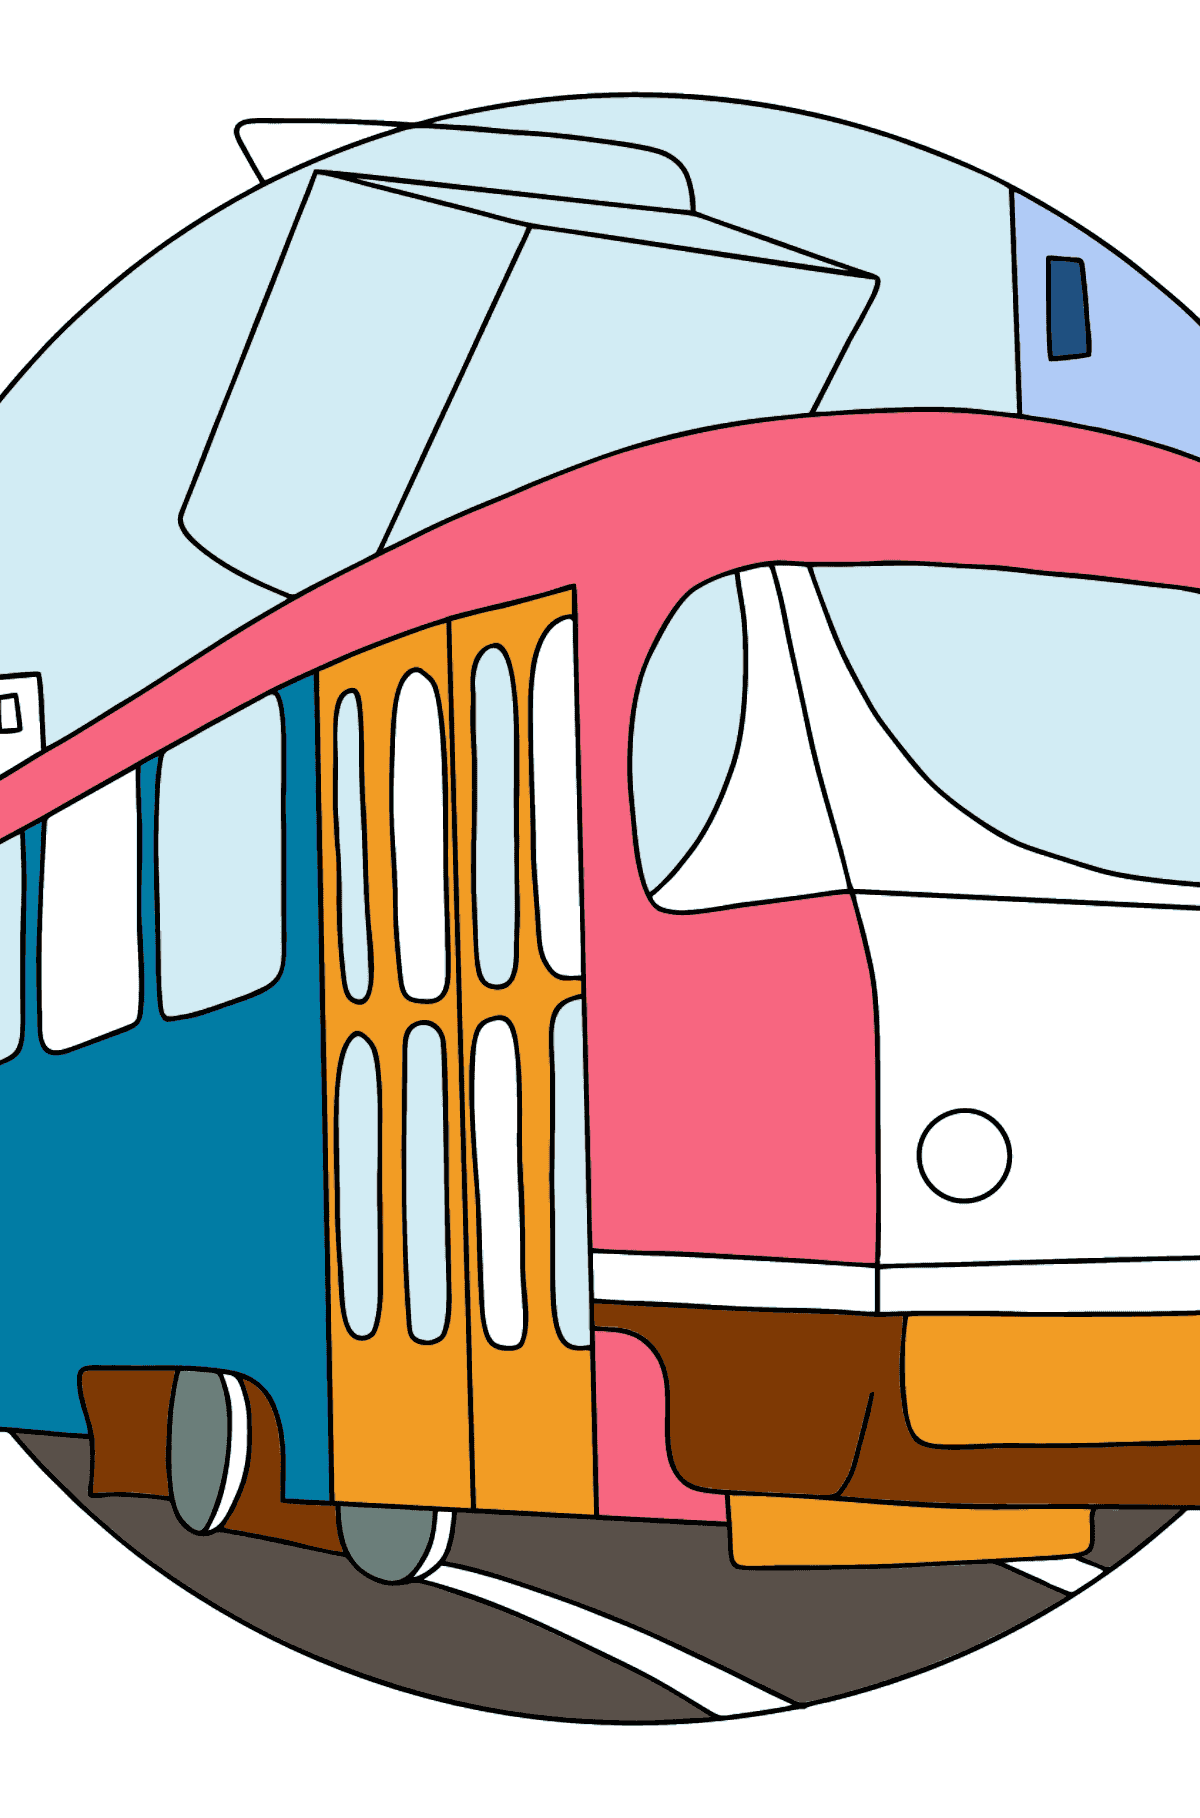 A Tram Coloring Page - Print fo free - Coloring Pages for Kids